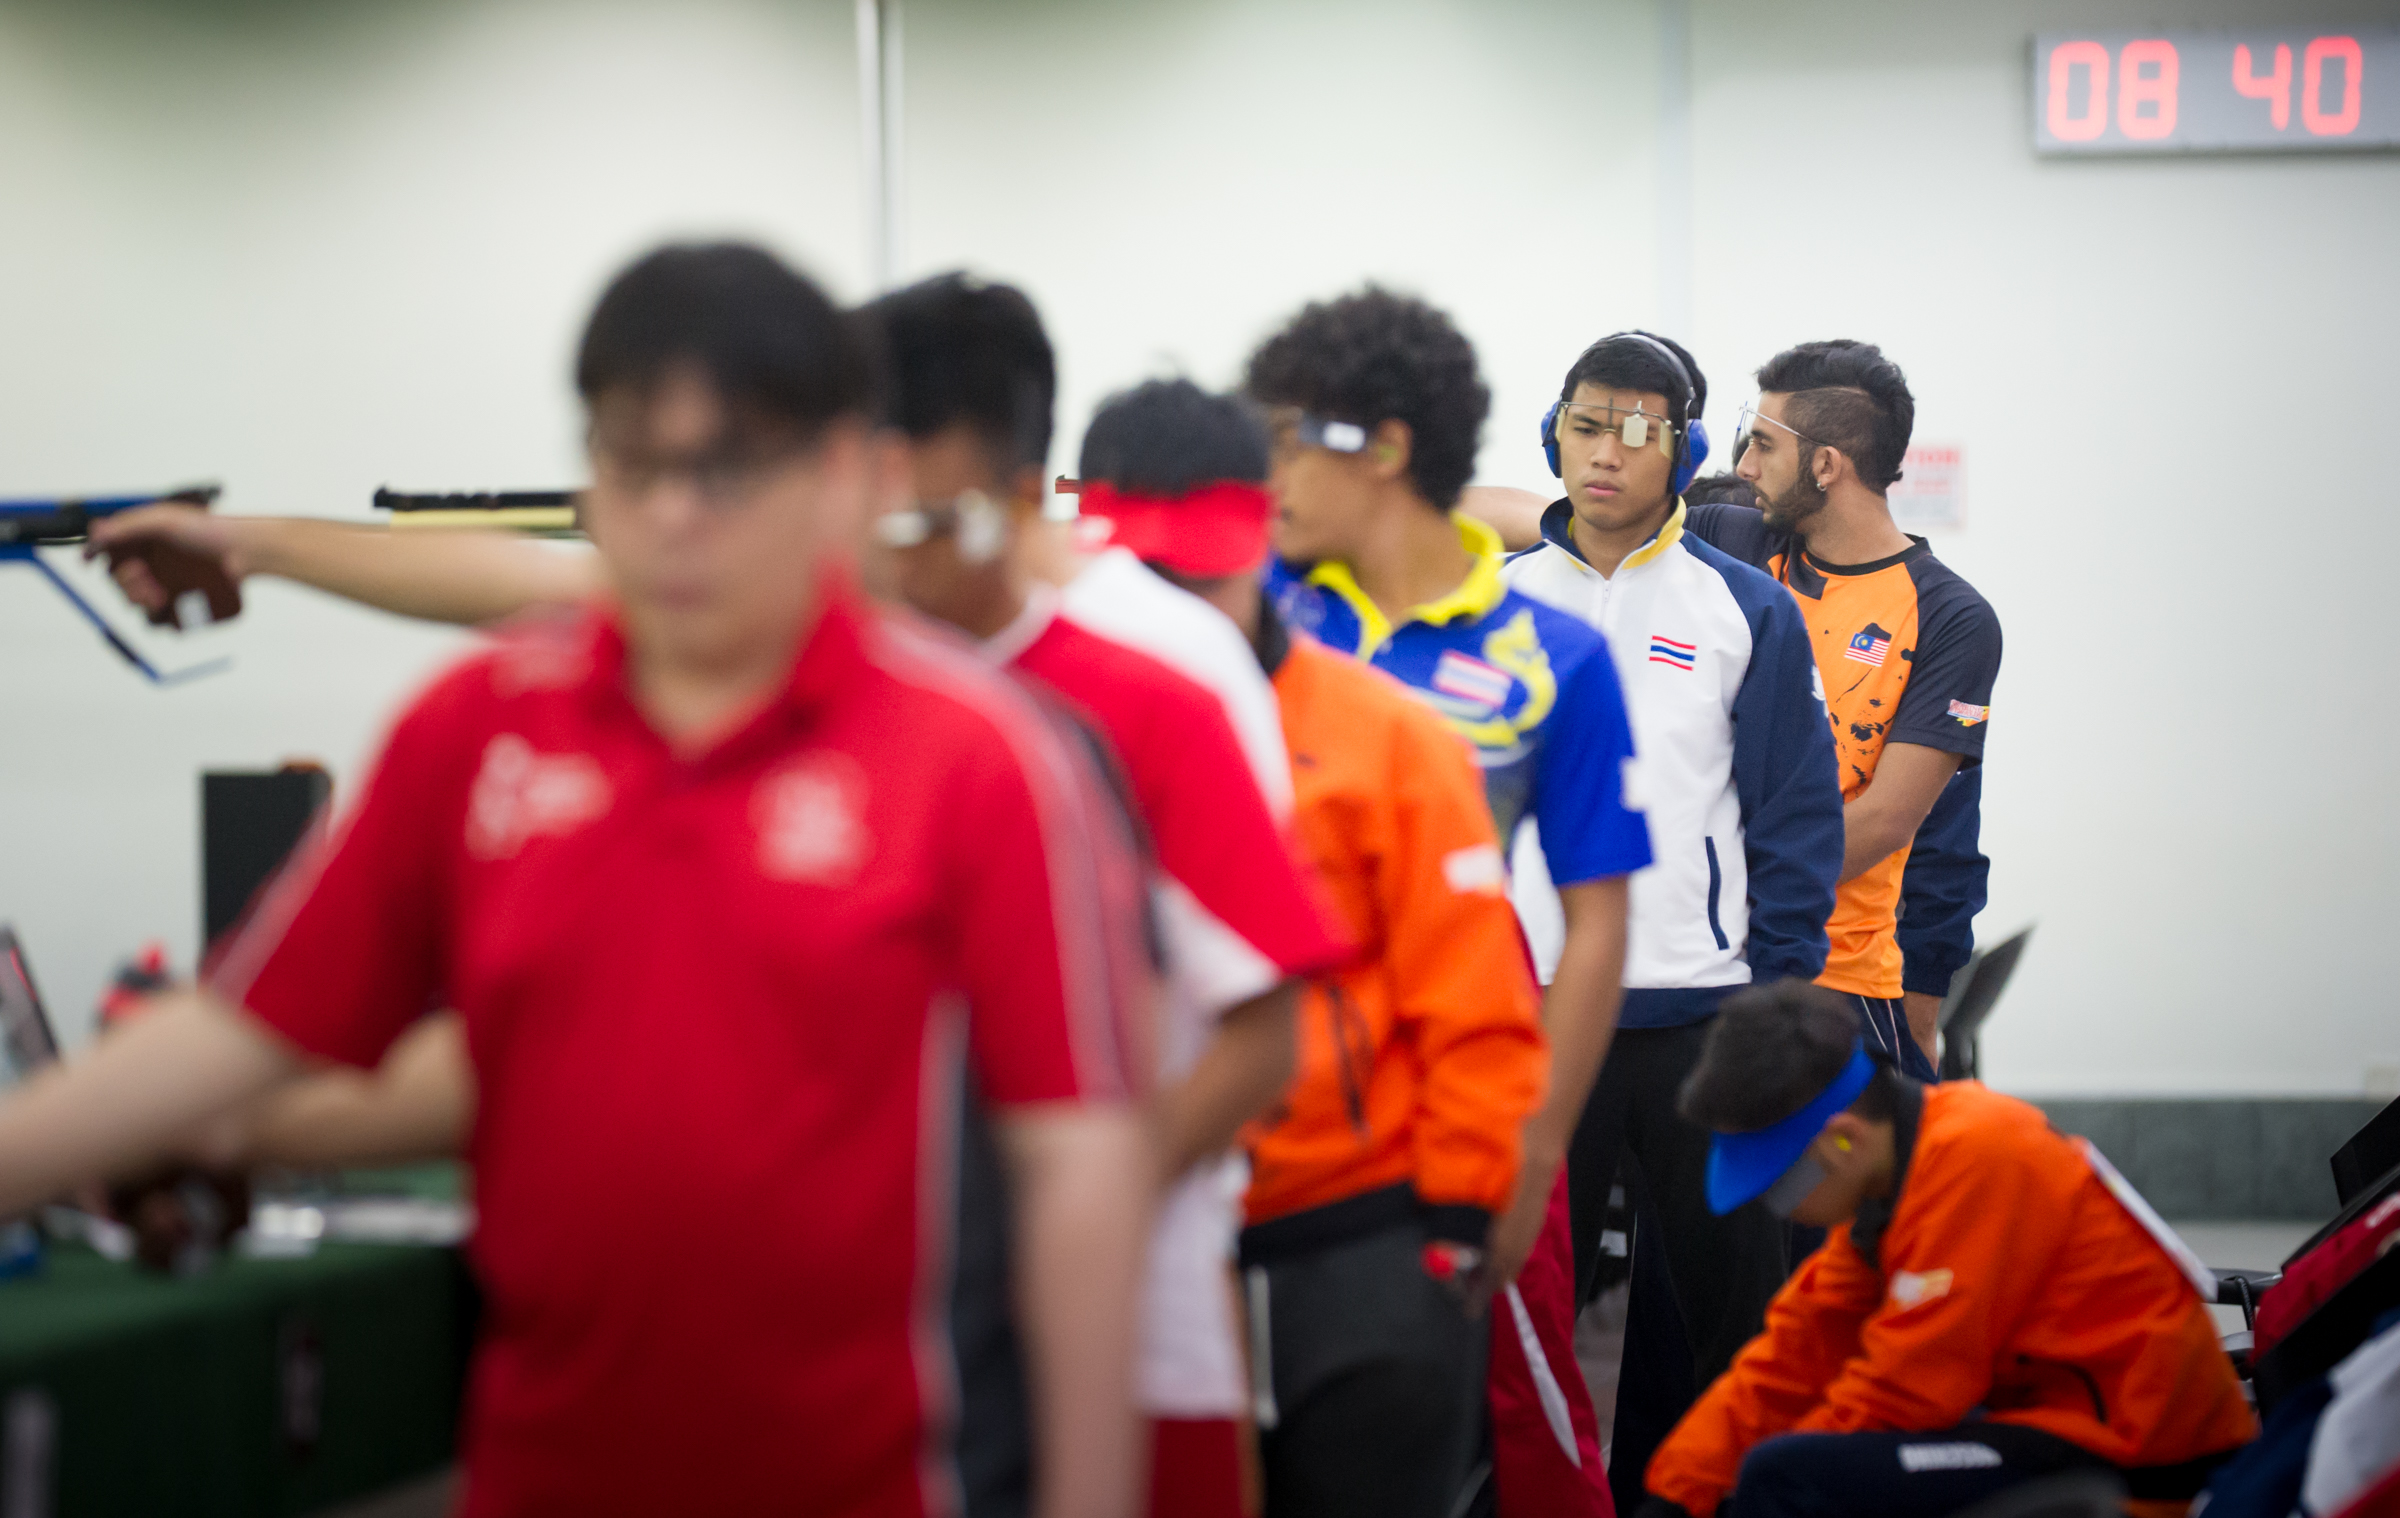 A Thai shooter recomposes himself during the shooting competition of the ASEAN University Games at Yishun SAFRA.